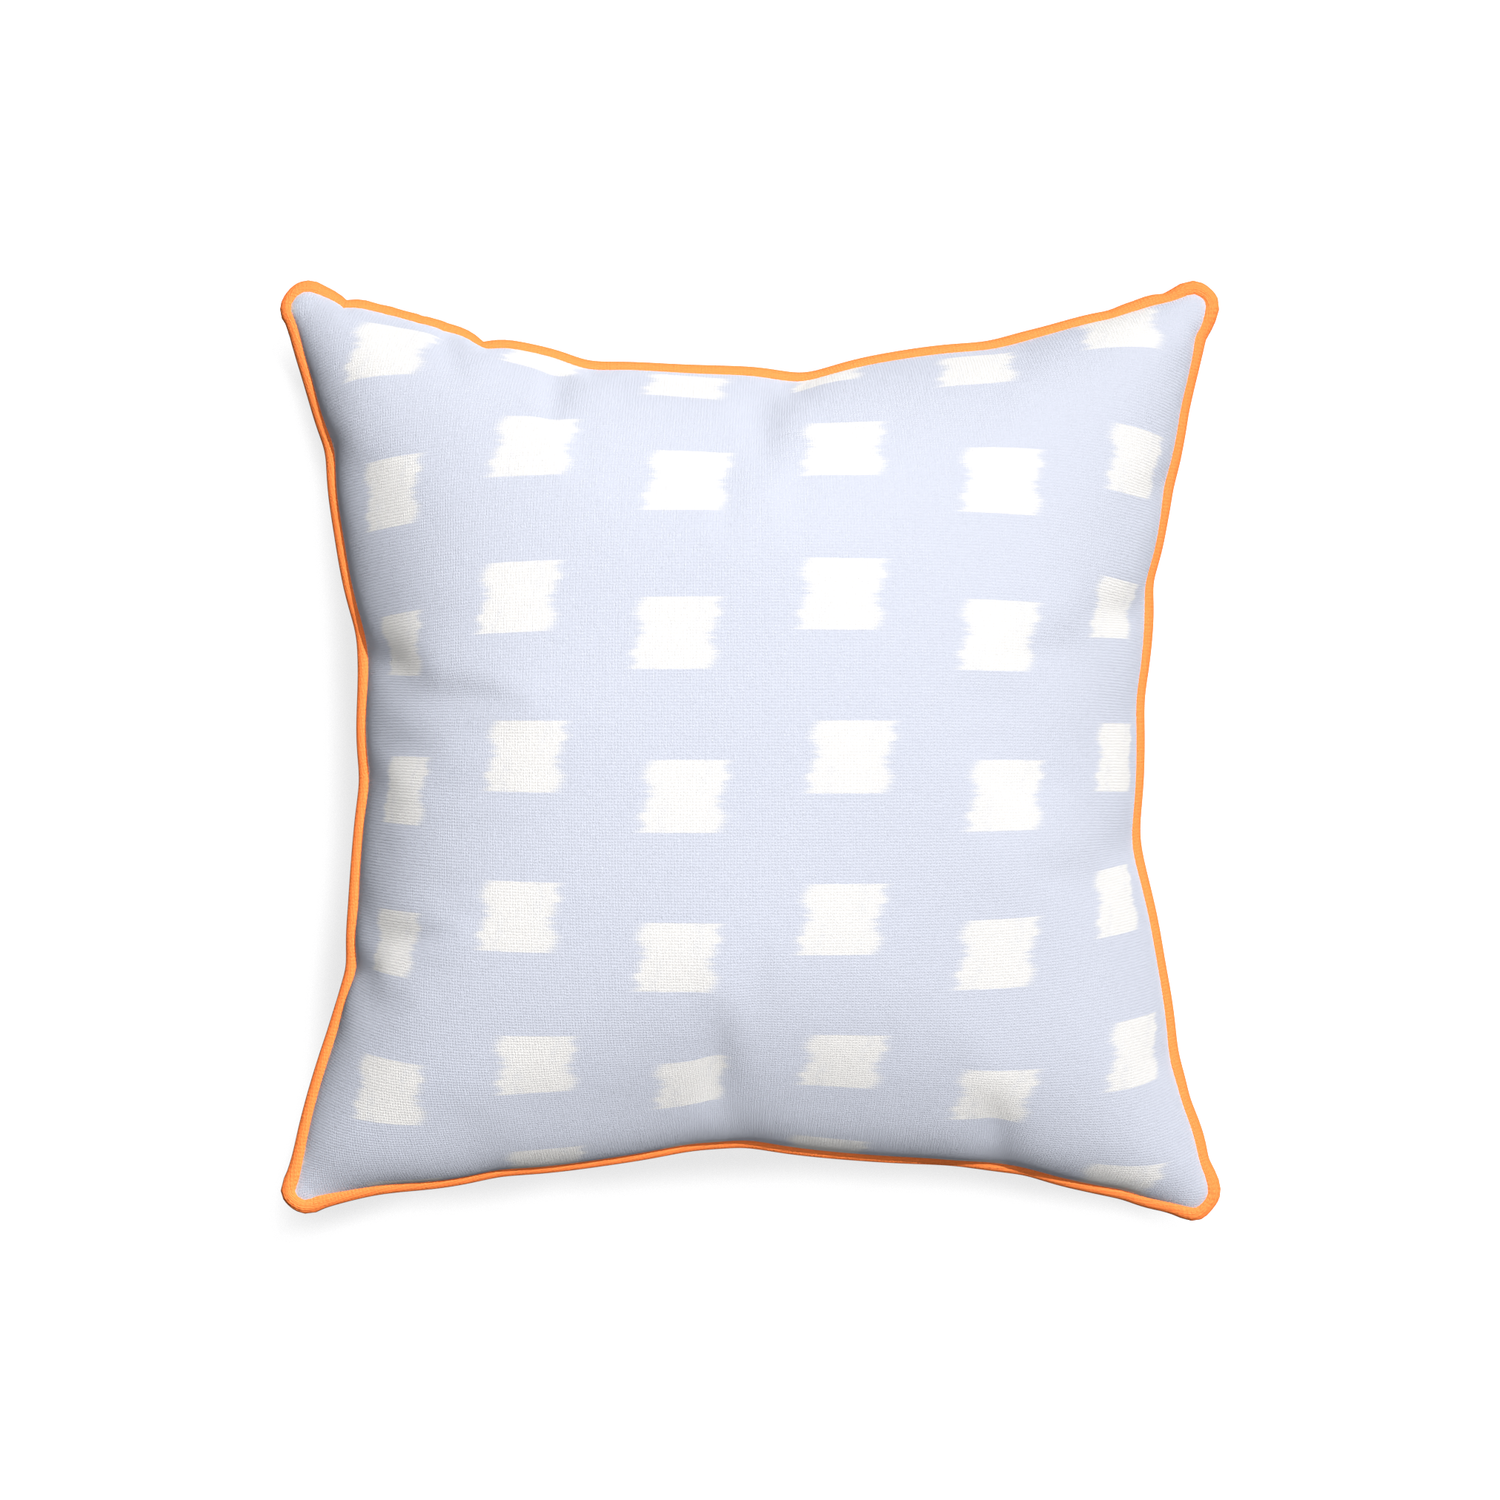 20-square denton custom sky blue patternpillow with clementine piping on white background